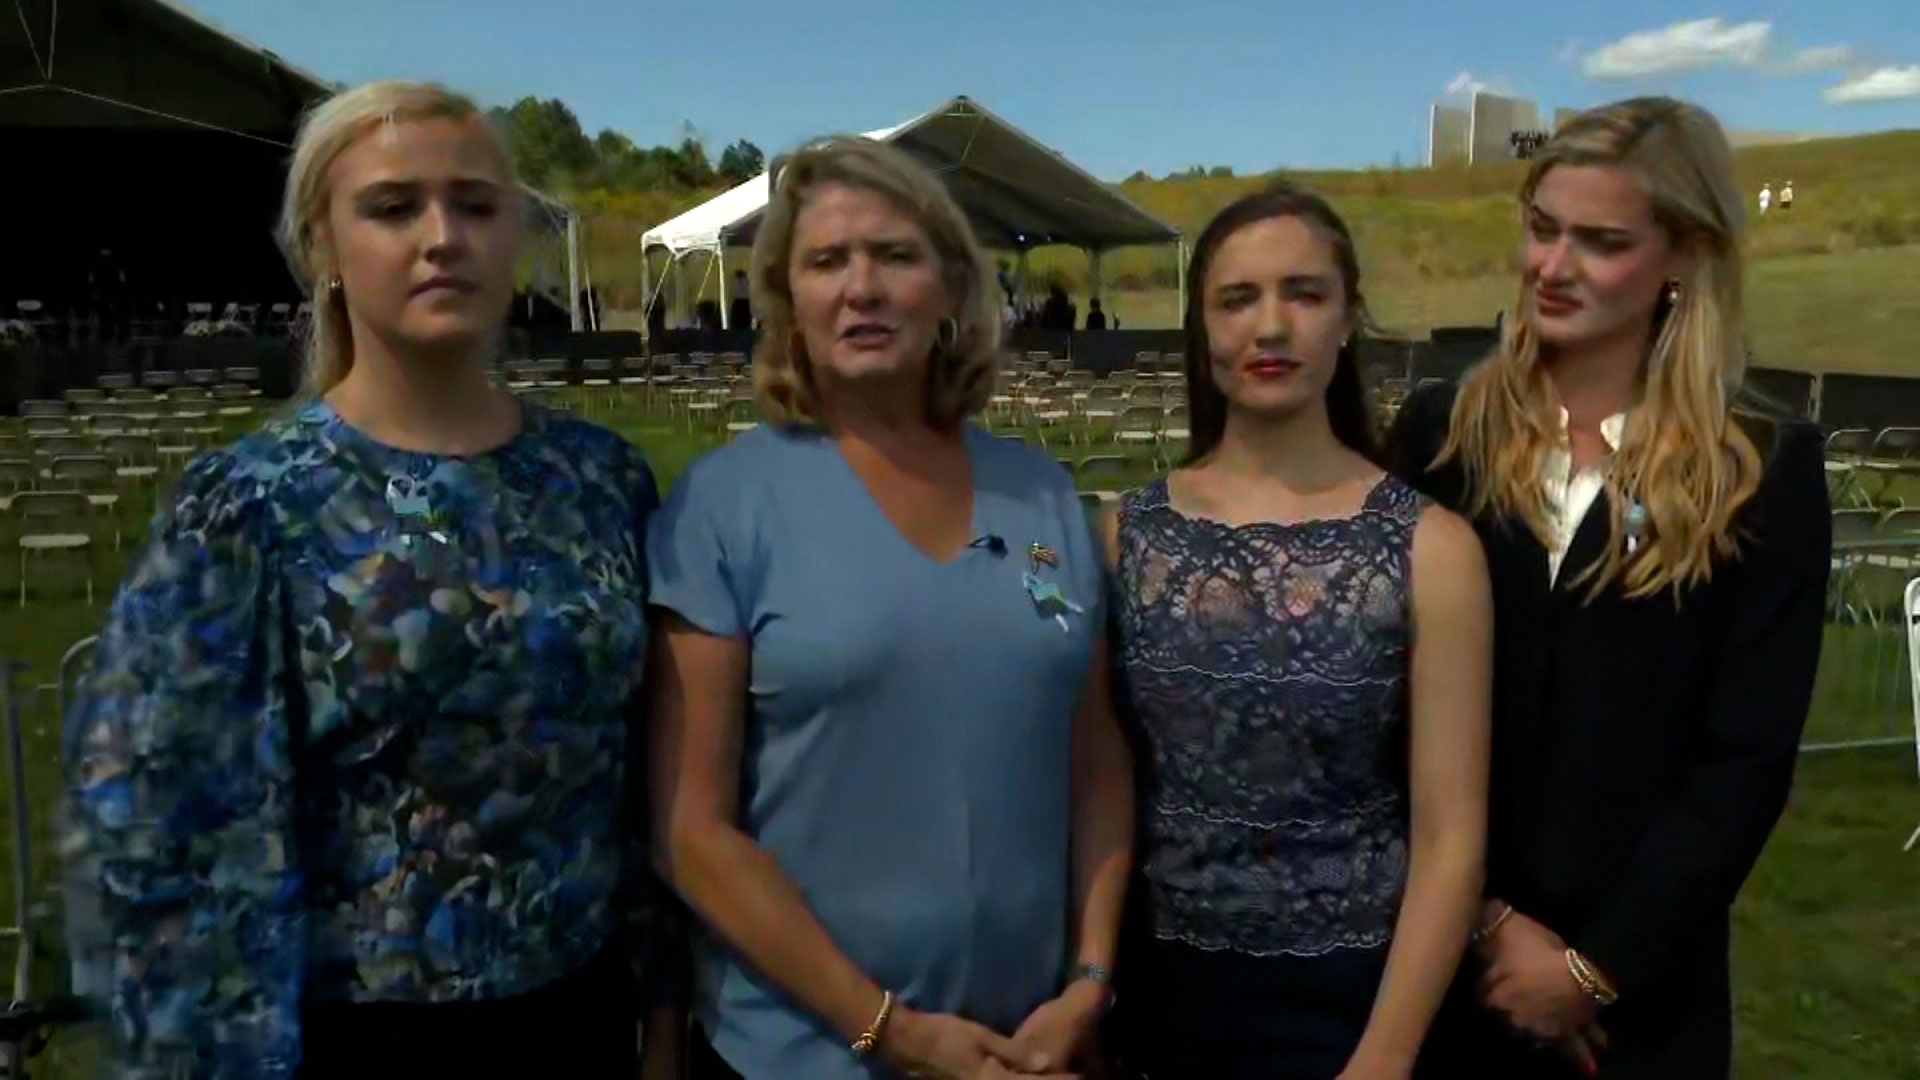 Deena Burnett Bailey, the wife of a Flight 93 victim, speaks with CNN from Shanksville, Pennsylvania, on September 11. She is joined by her daughters.